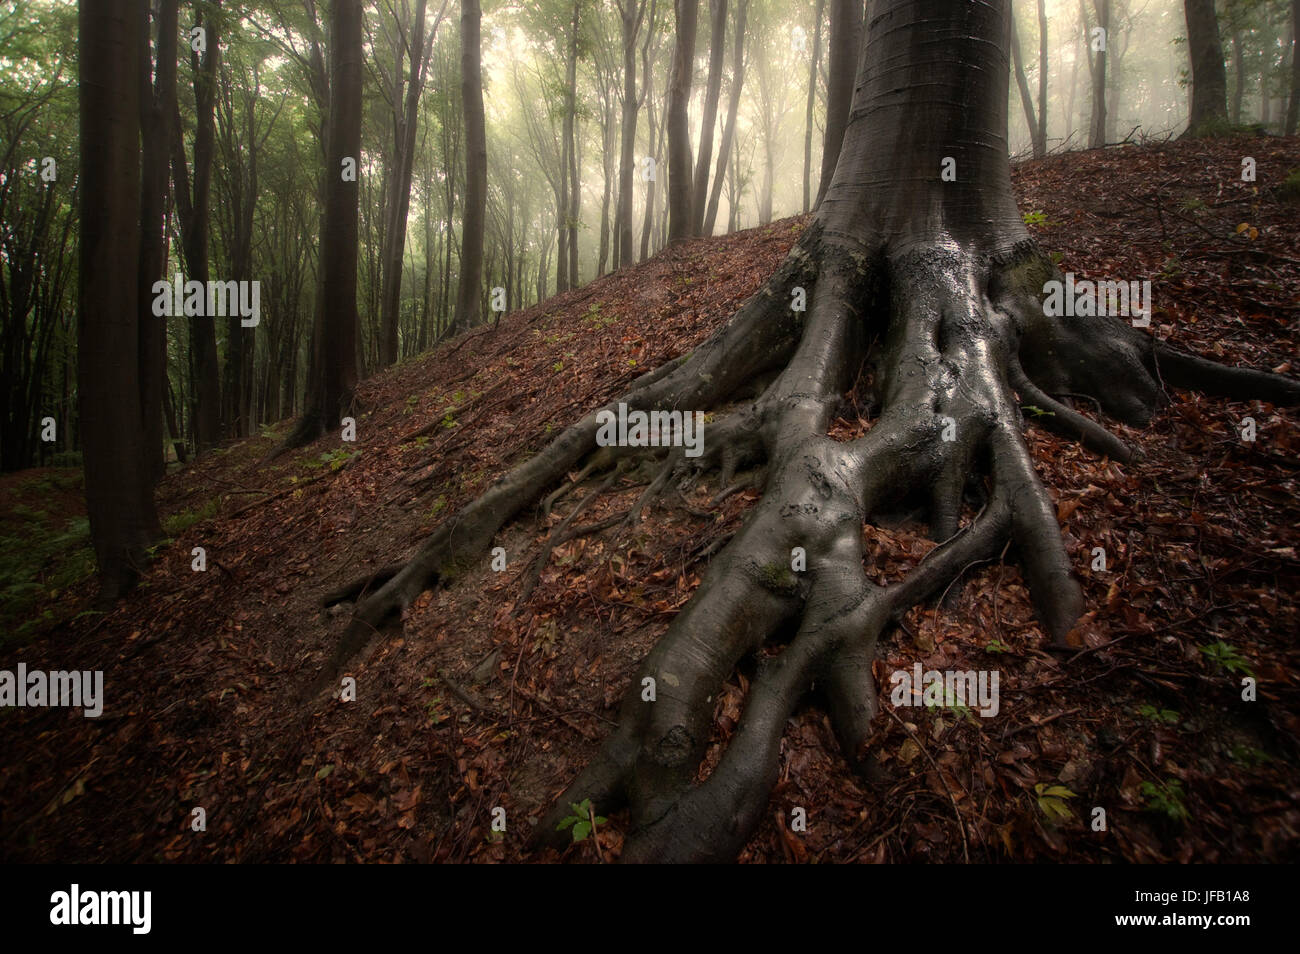 tree roots in rainy forest landscape Stock Photo